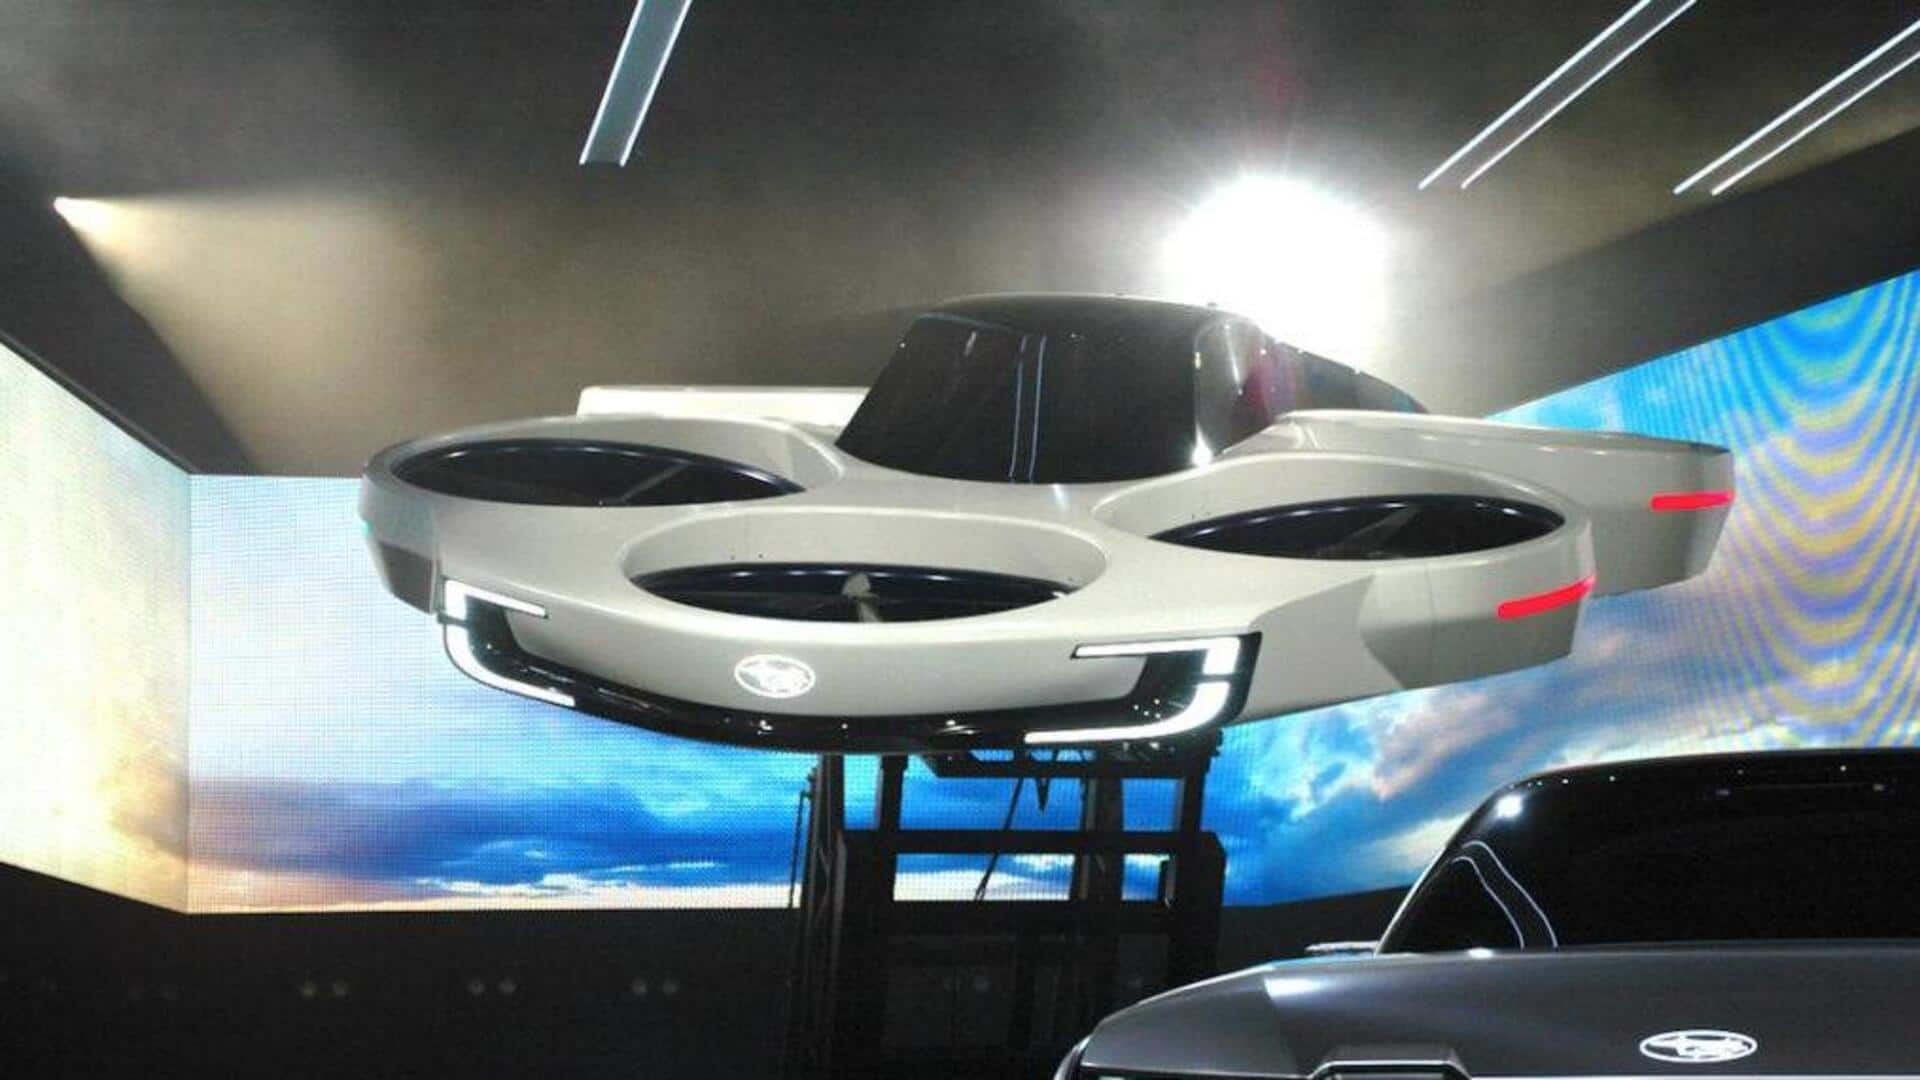 Subaru's flying car concept is straight from a Sci-Fi movie